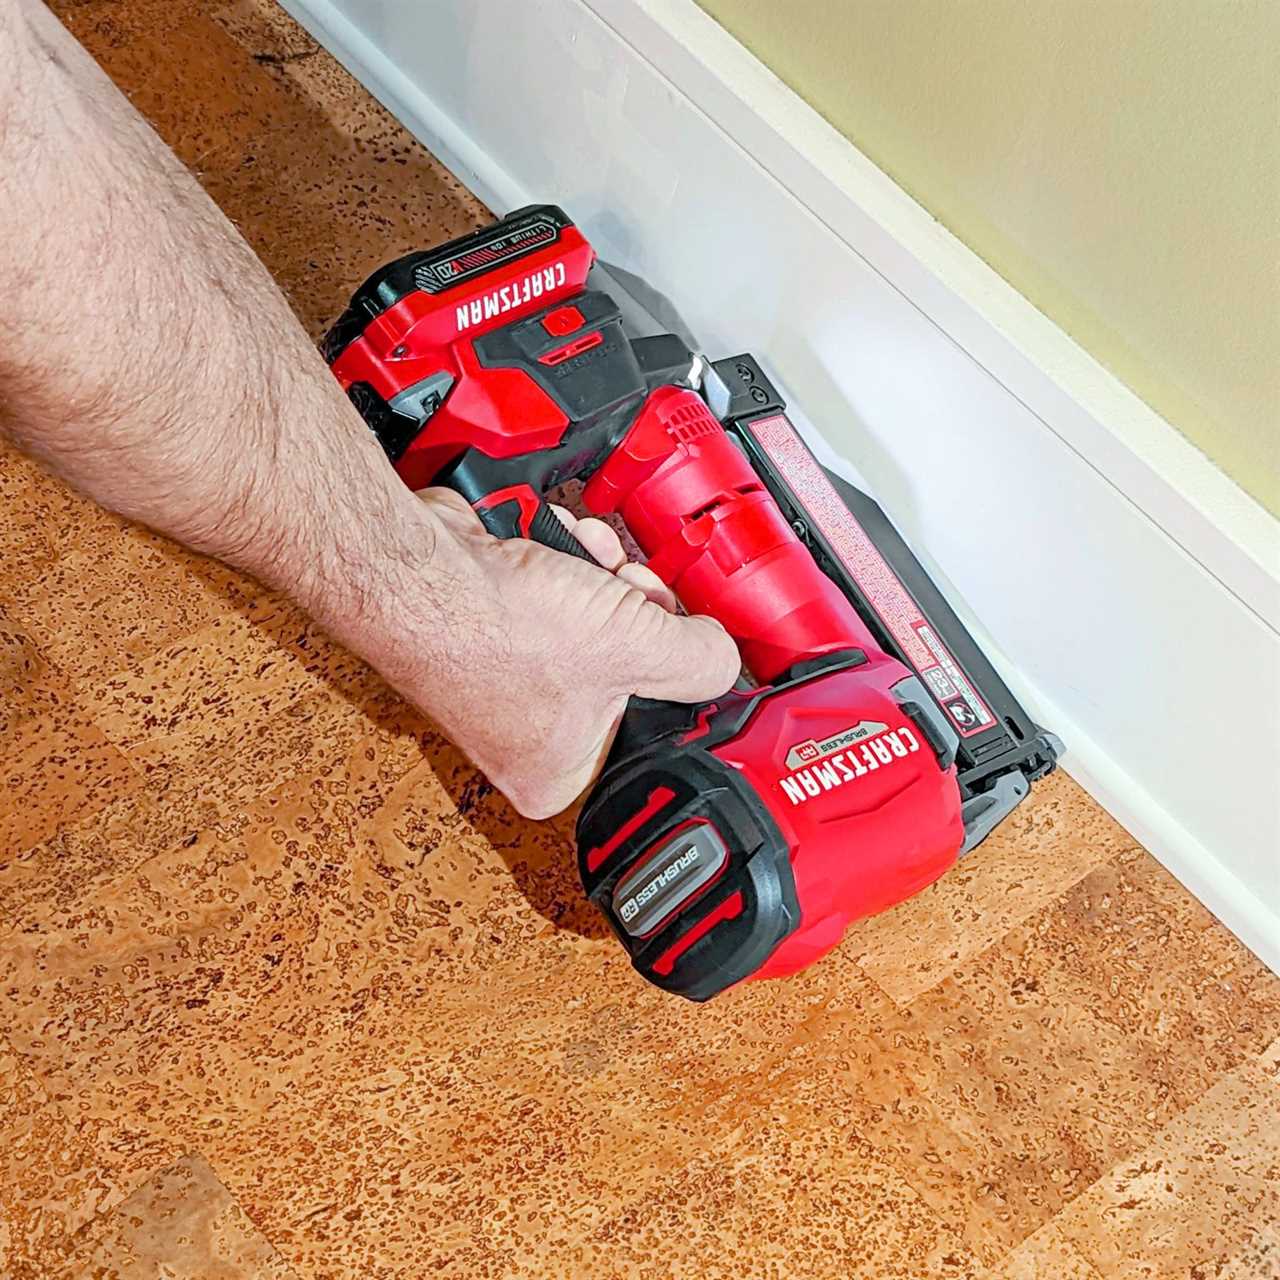 hand using a Craftsman Cordless 23 Gauge Nailer on the baseboards in a house